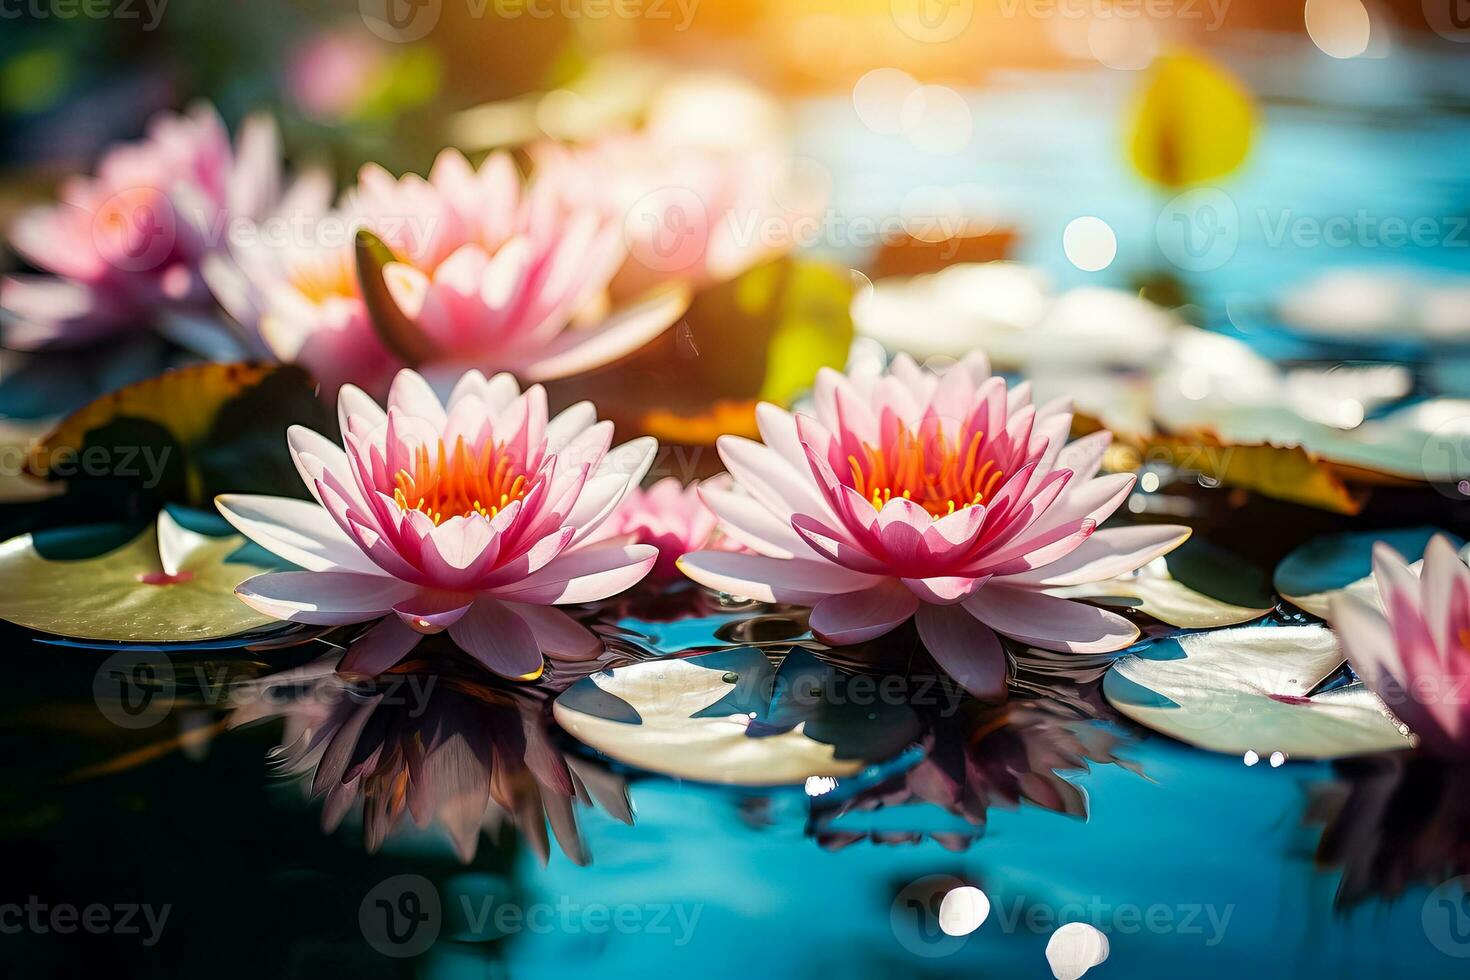 Water lilies used in natural pool for chemical-free water filtration and purification photo